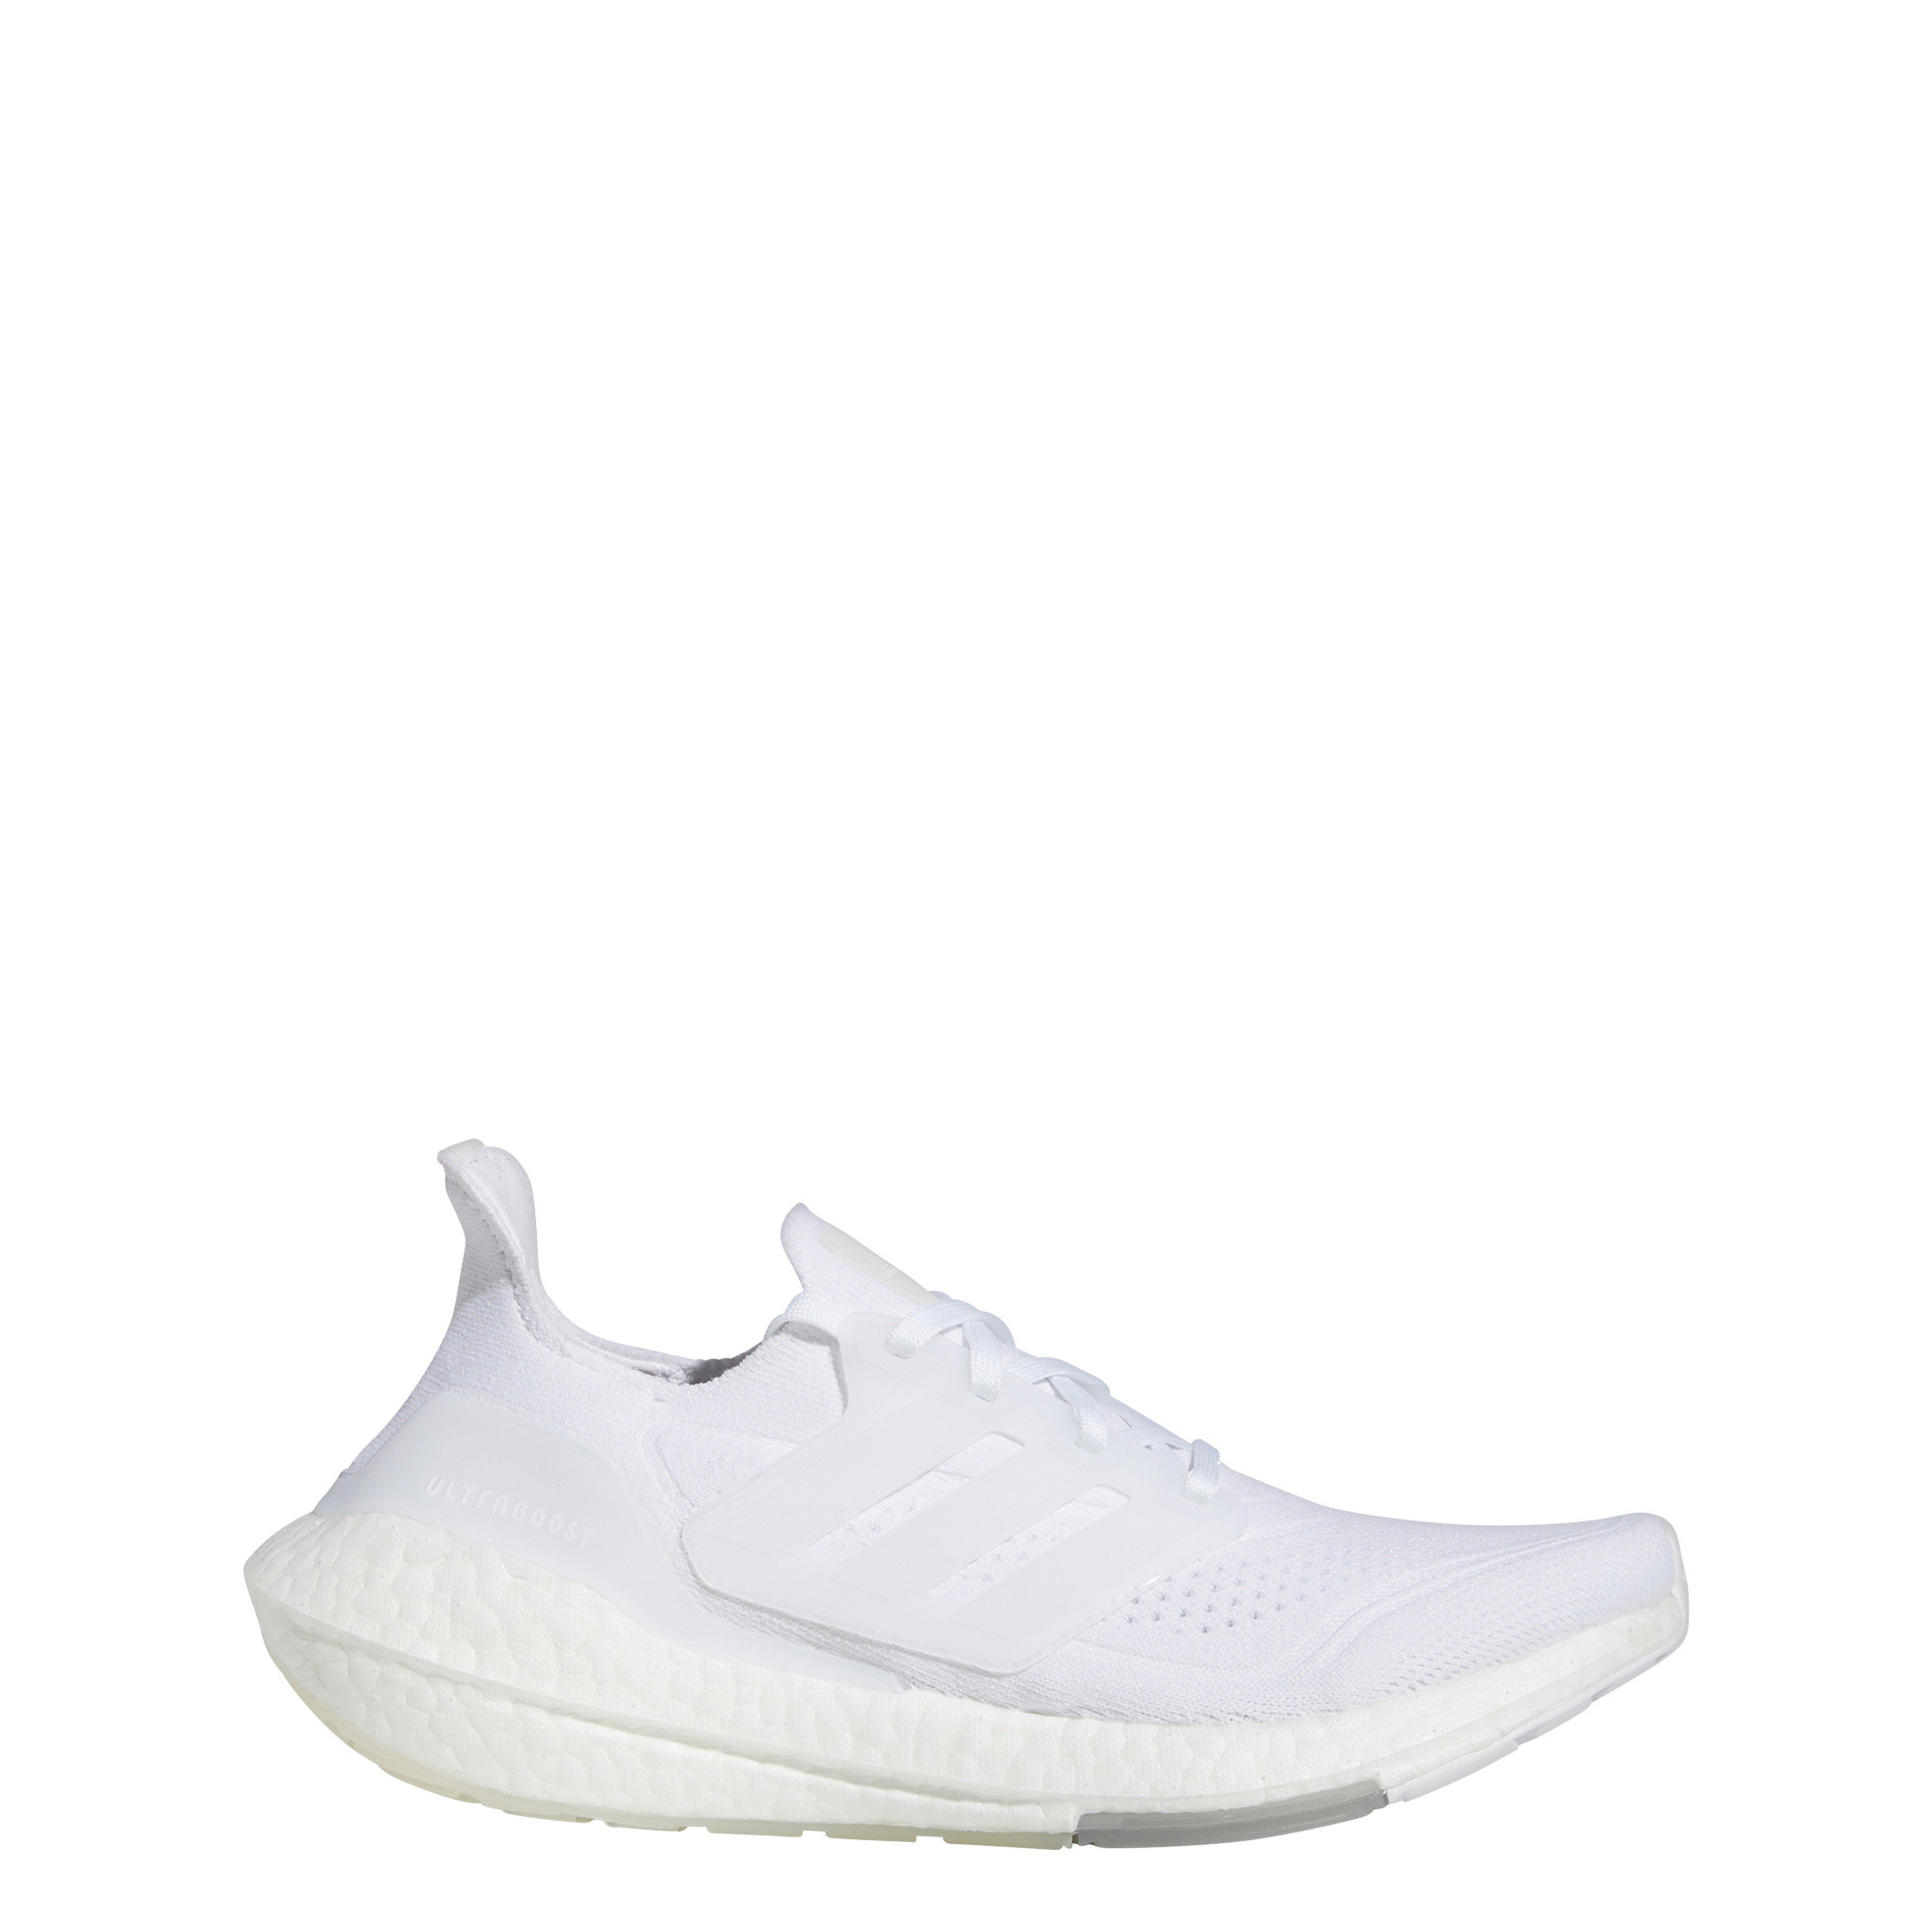 Ultraboost 21 Shoes, White, large image number 6